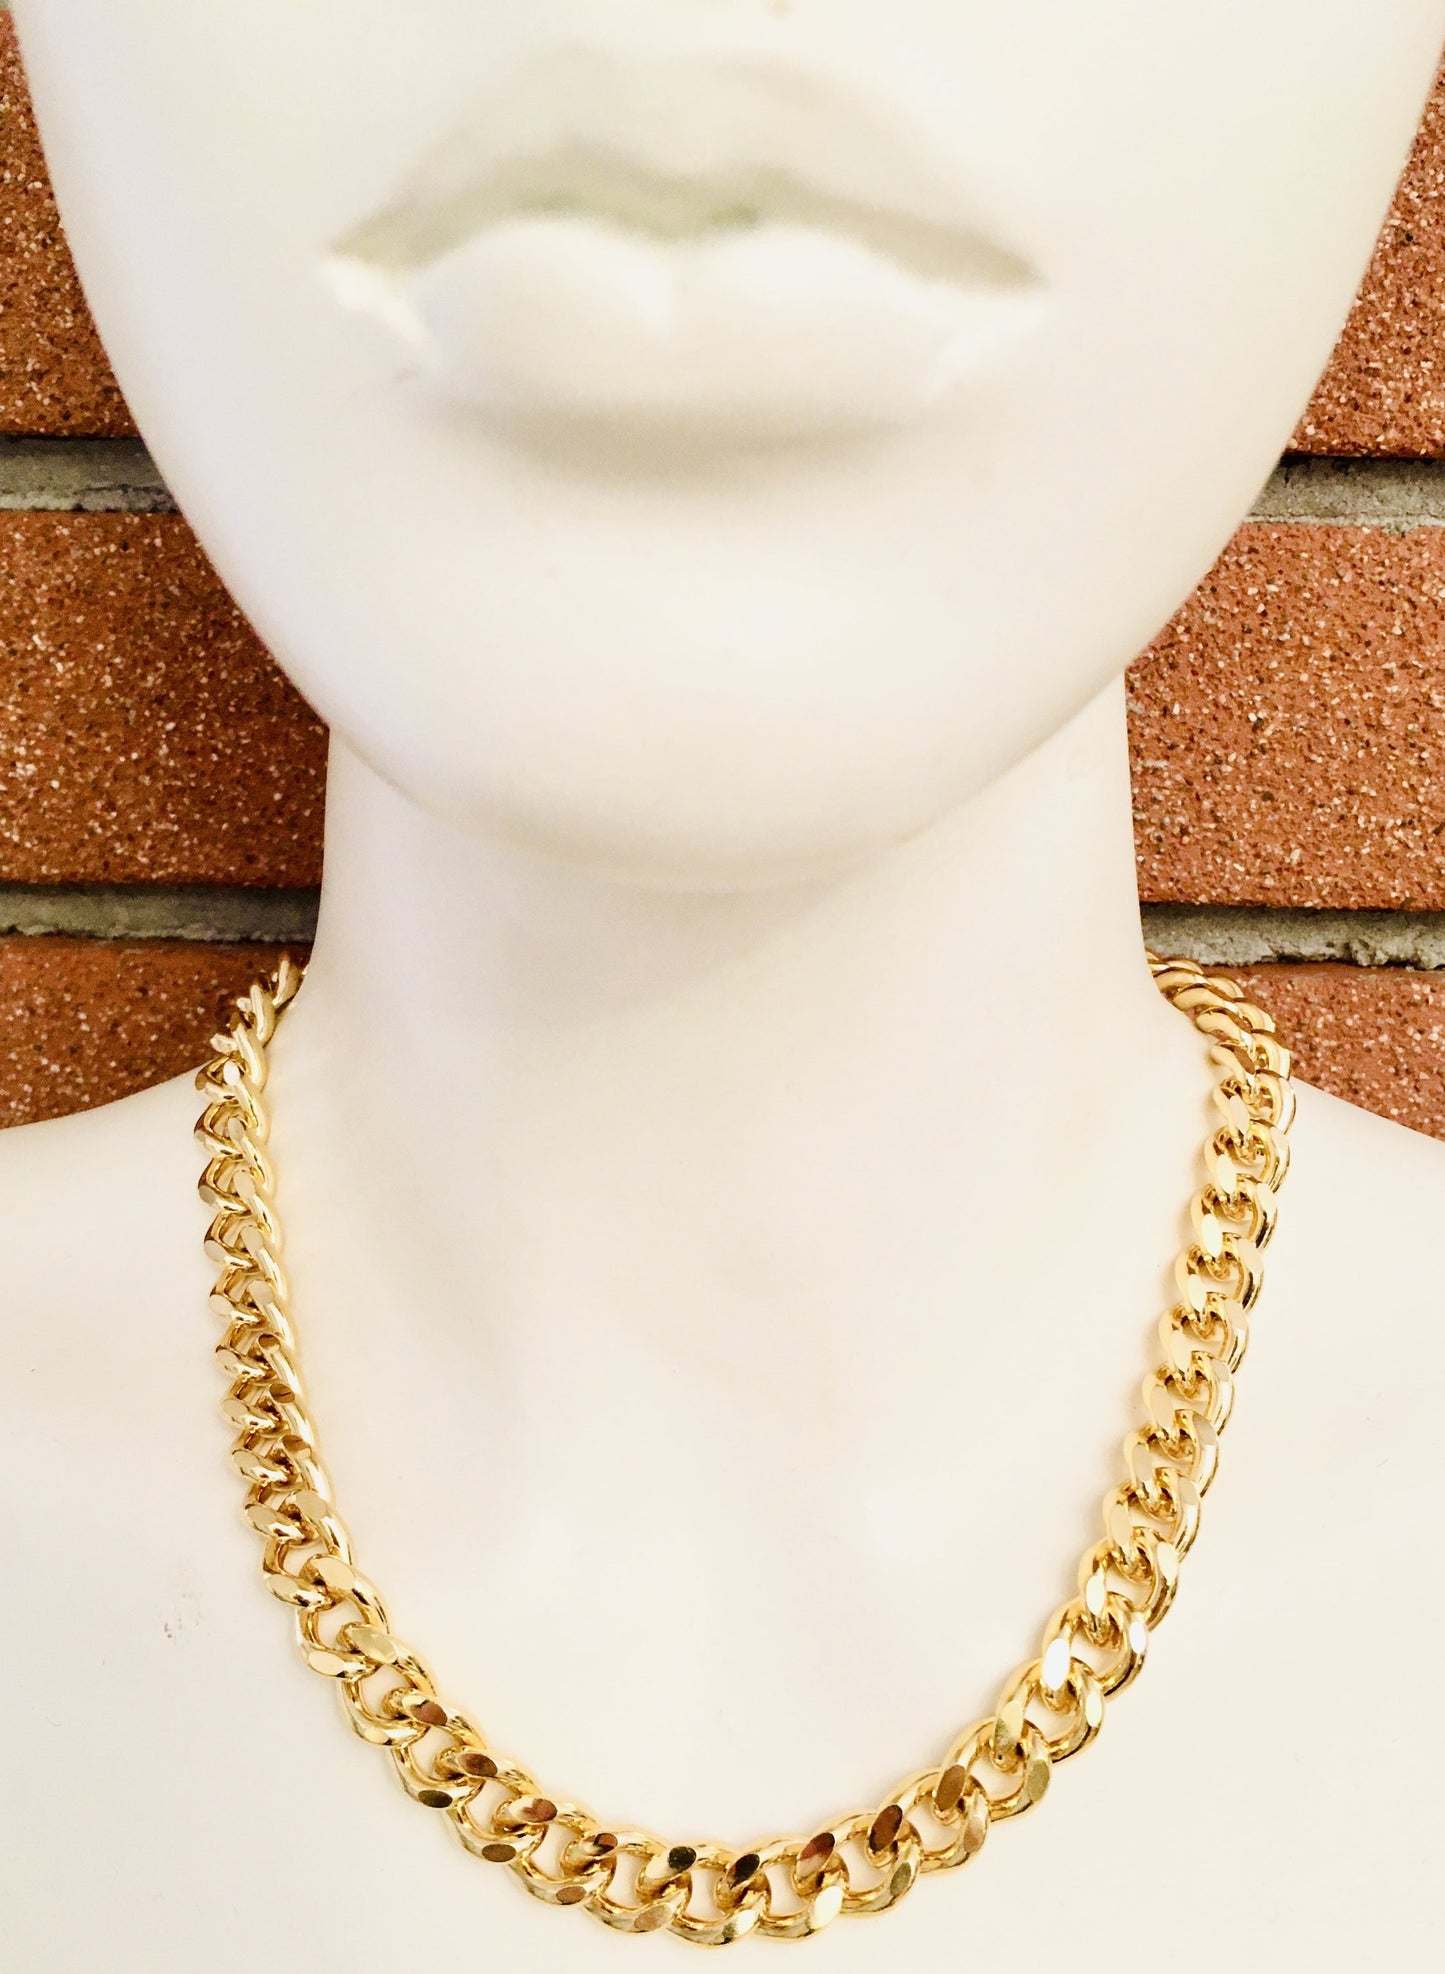 18kt Gold plated brass Curb Chain Necklace and rudder clasp. Rudder